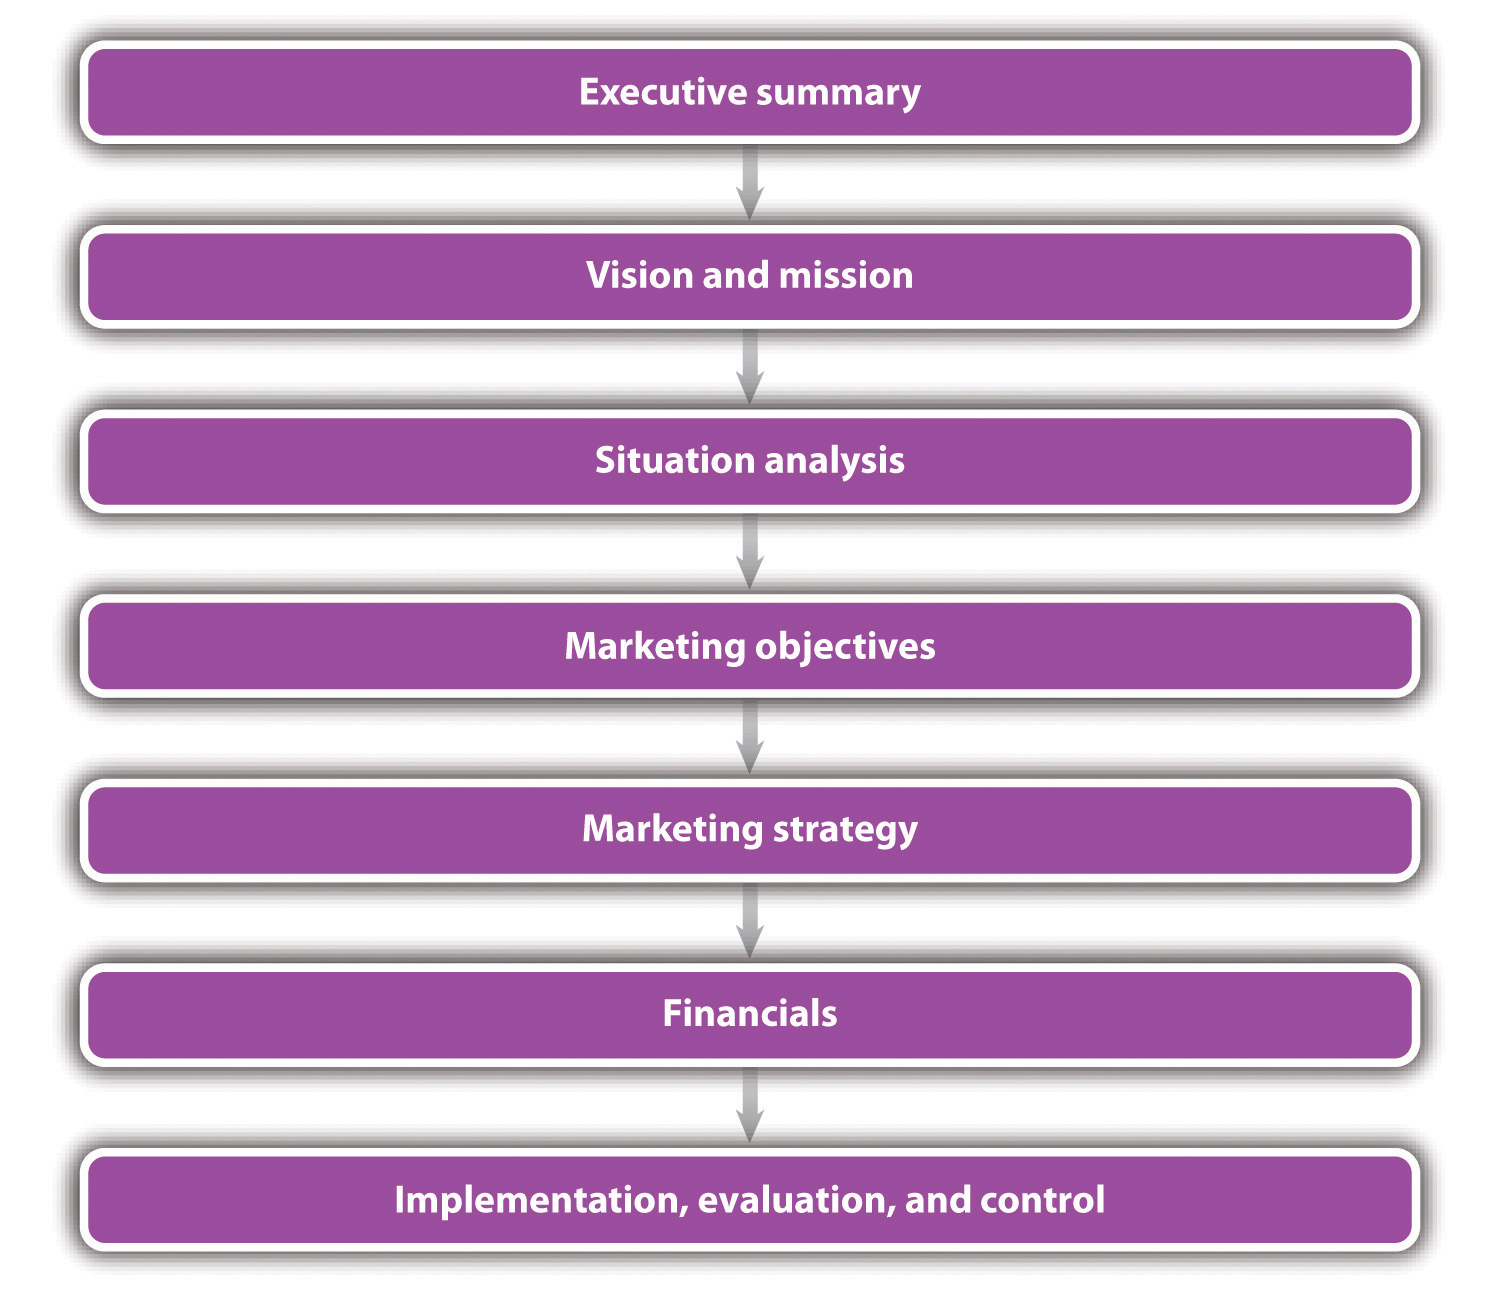 The Marketing Plan: executive summary, vision and mission, situation analysis, marketing objectives, marketing strategy, financials, implementation, evaluation, and control